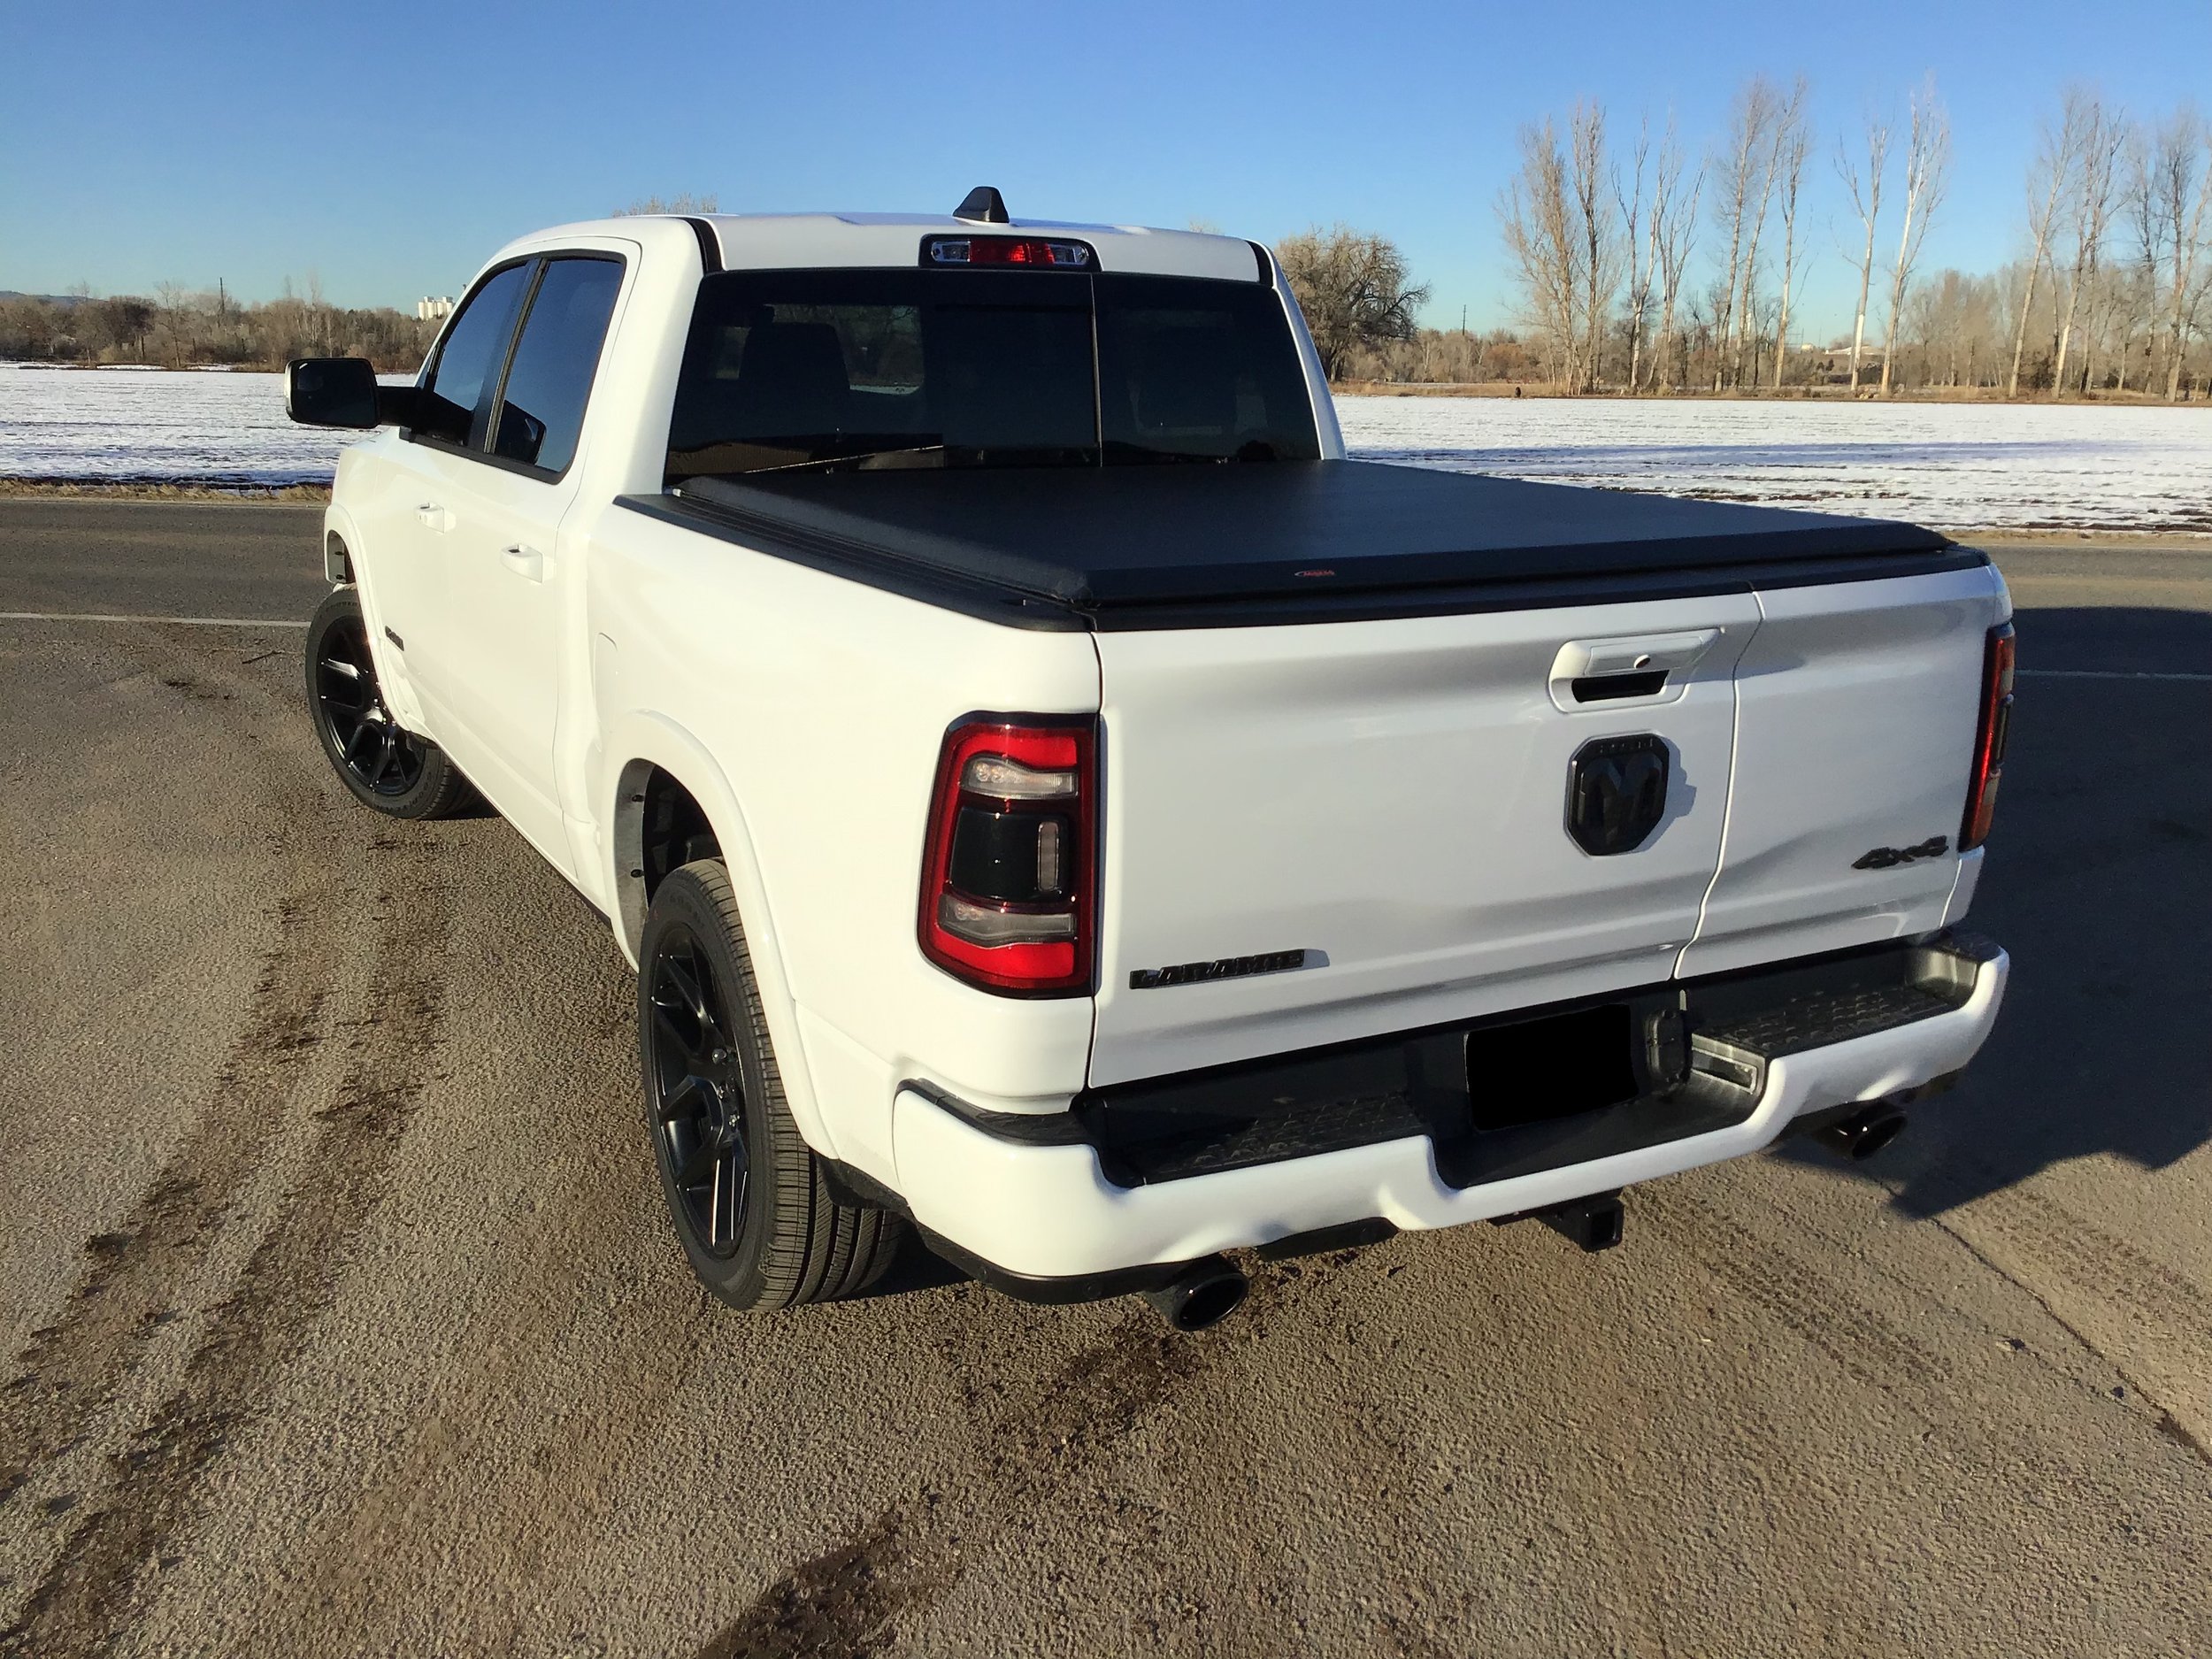 5TH GEN RAM 1500 ACCESS COVER CLASSIC ROLL UP TONNEAU COVER BEDSLIDE MULTI-FUNCTION TAILGATE S-CARGO TRUCK CAPS LOVELAND COLORADO 1.JPG